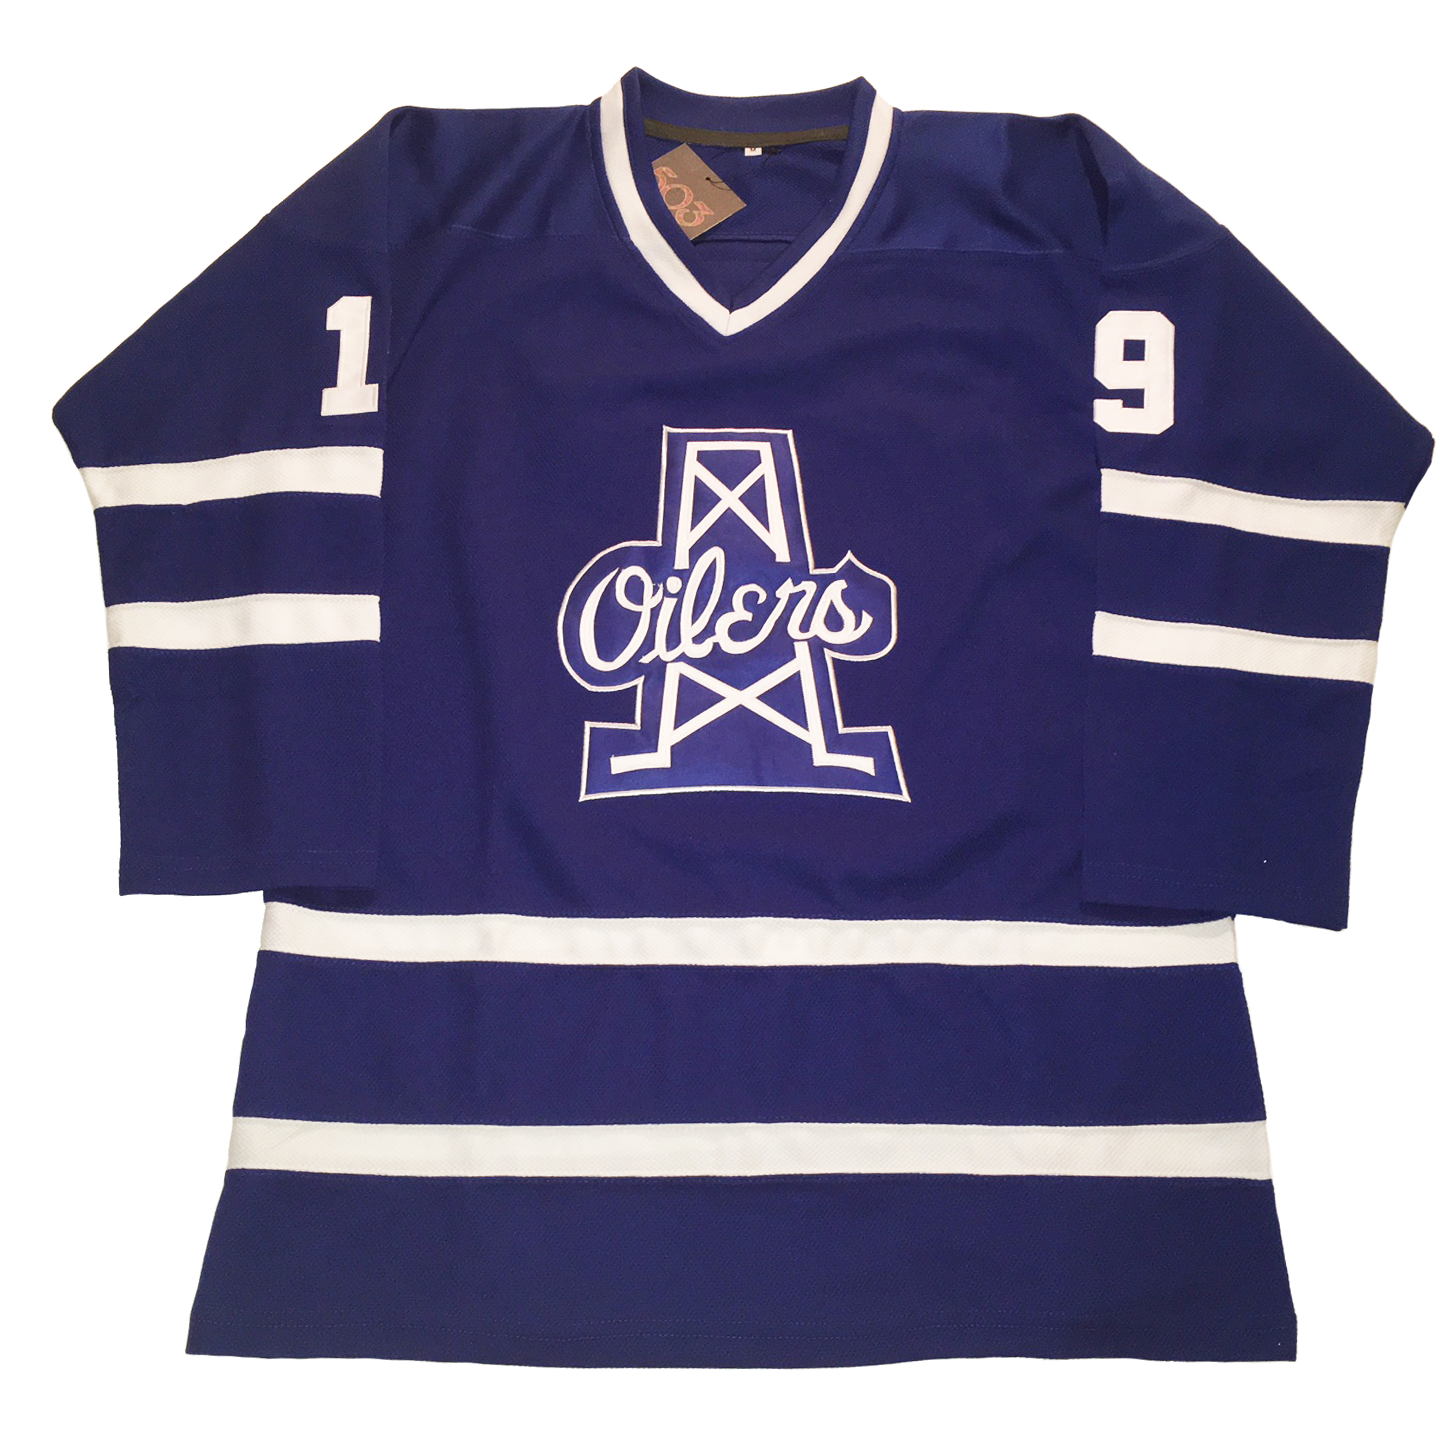 How I accidentally designed an ECHL (Tulsa Oilers) jersey. : r